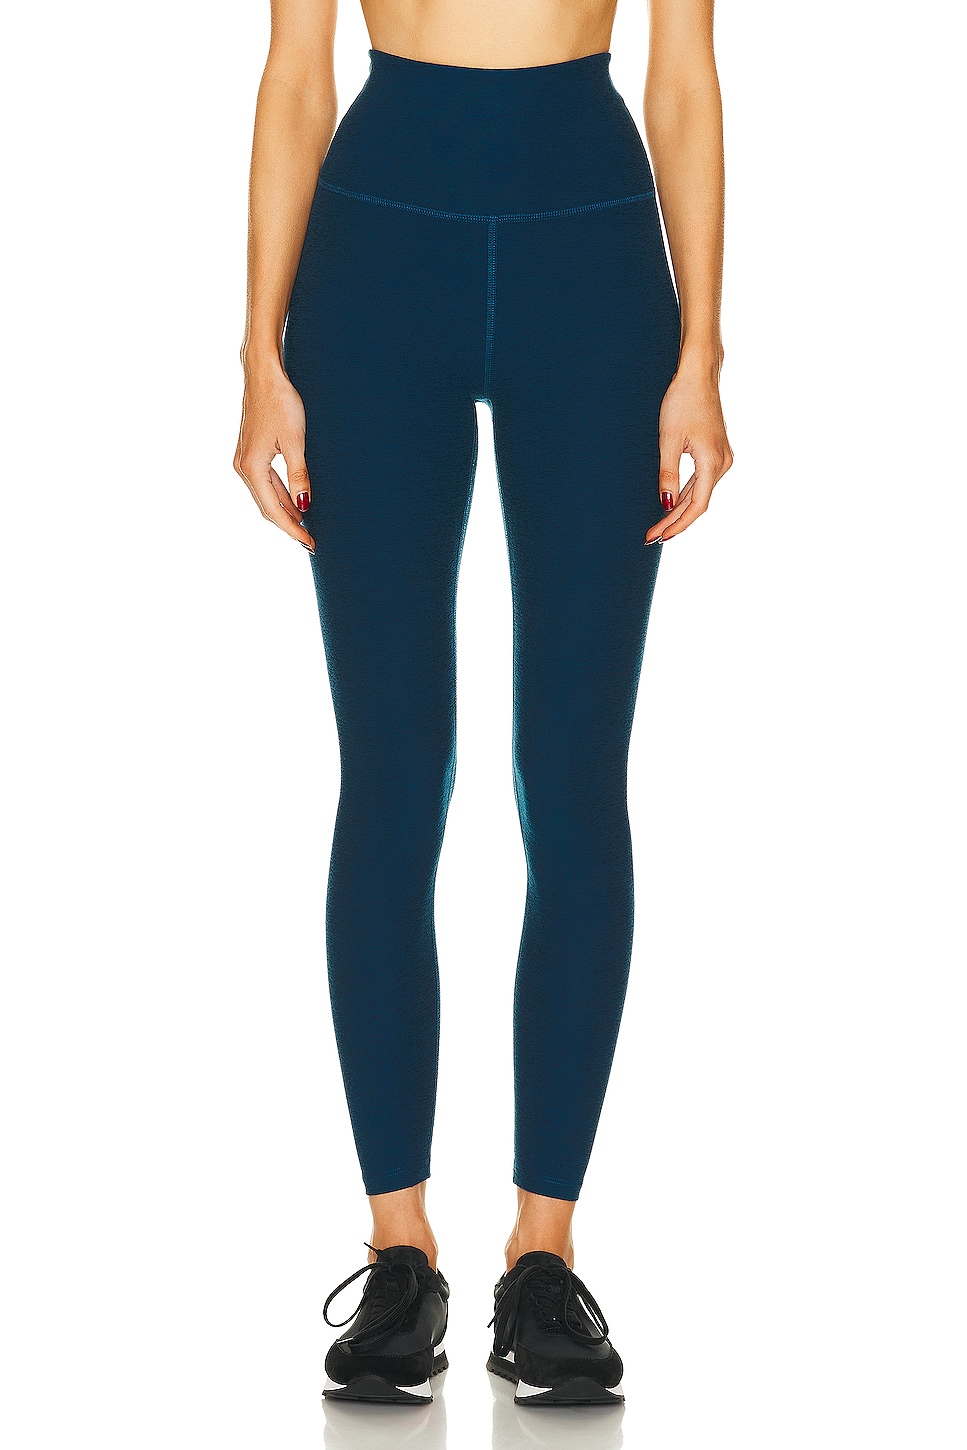 Image 1 of Beyond Yoga Spacedye Caught In The Midi High Waisted Legging in Blue Gem Heather